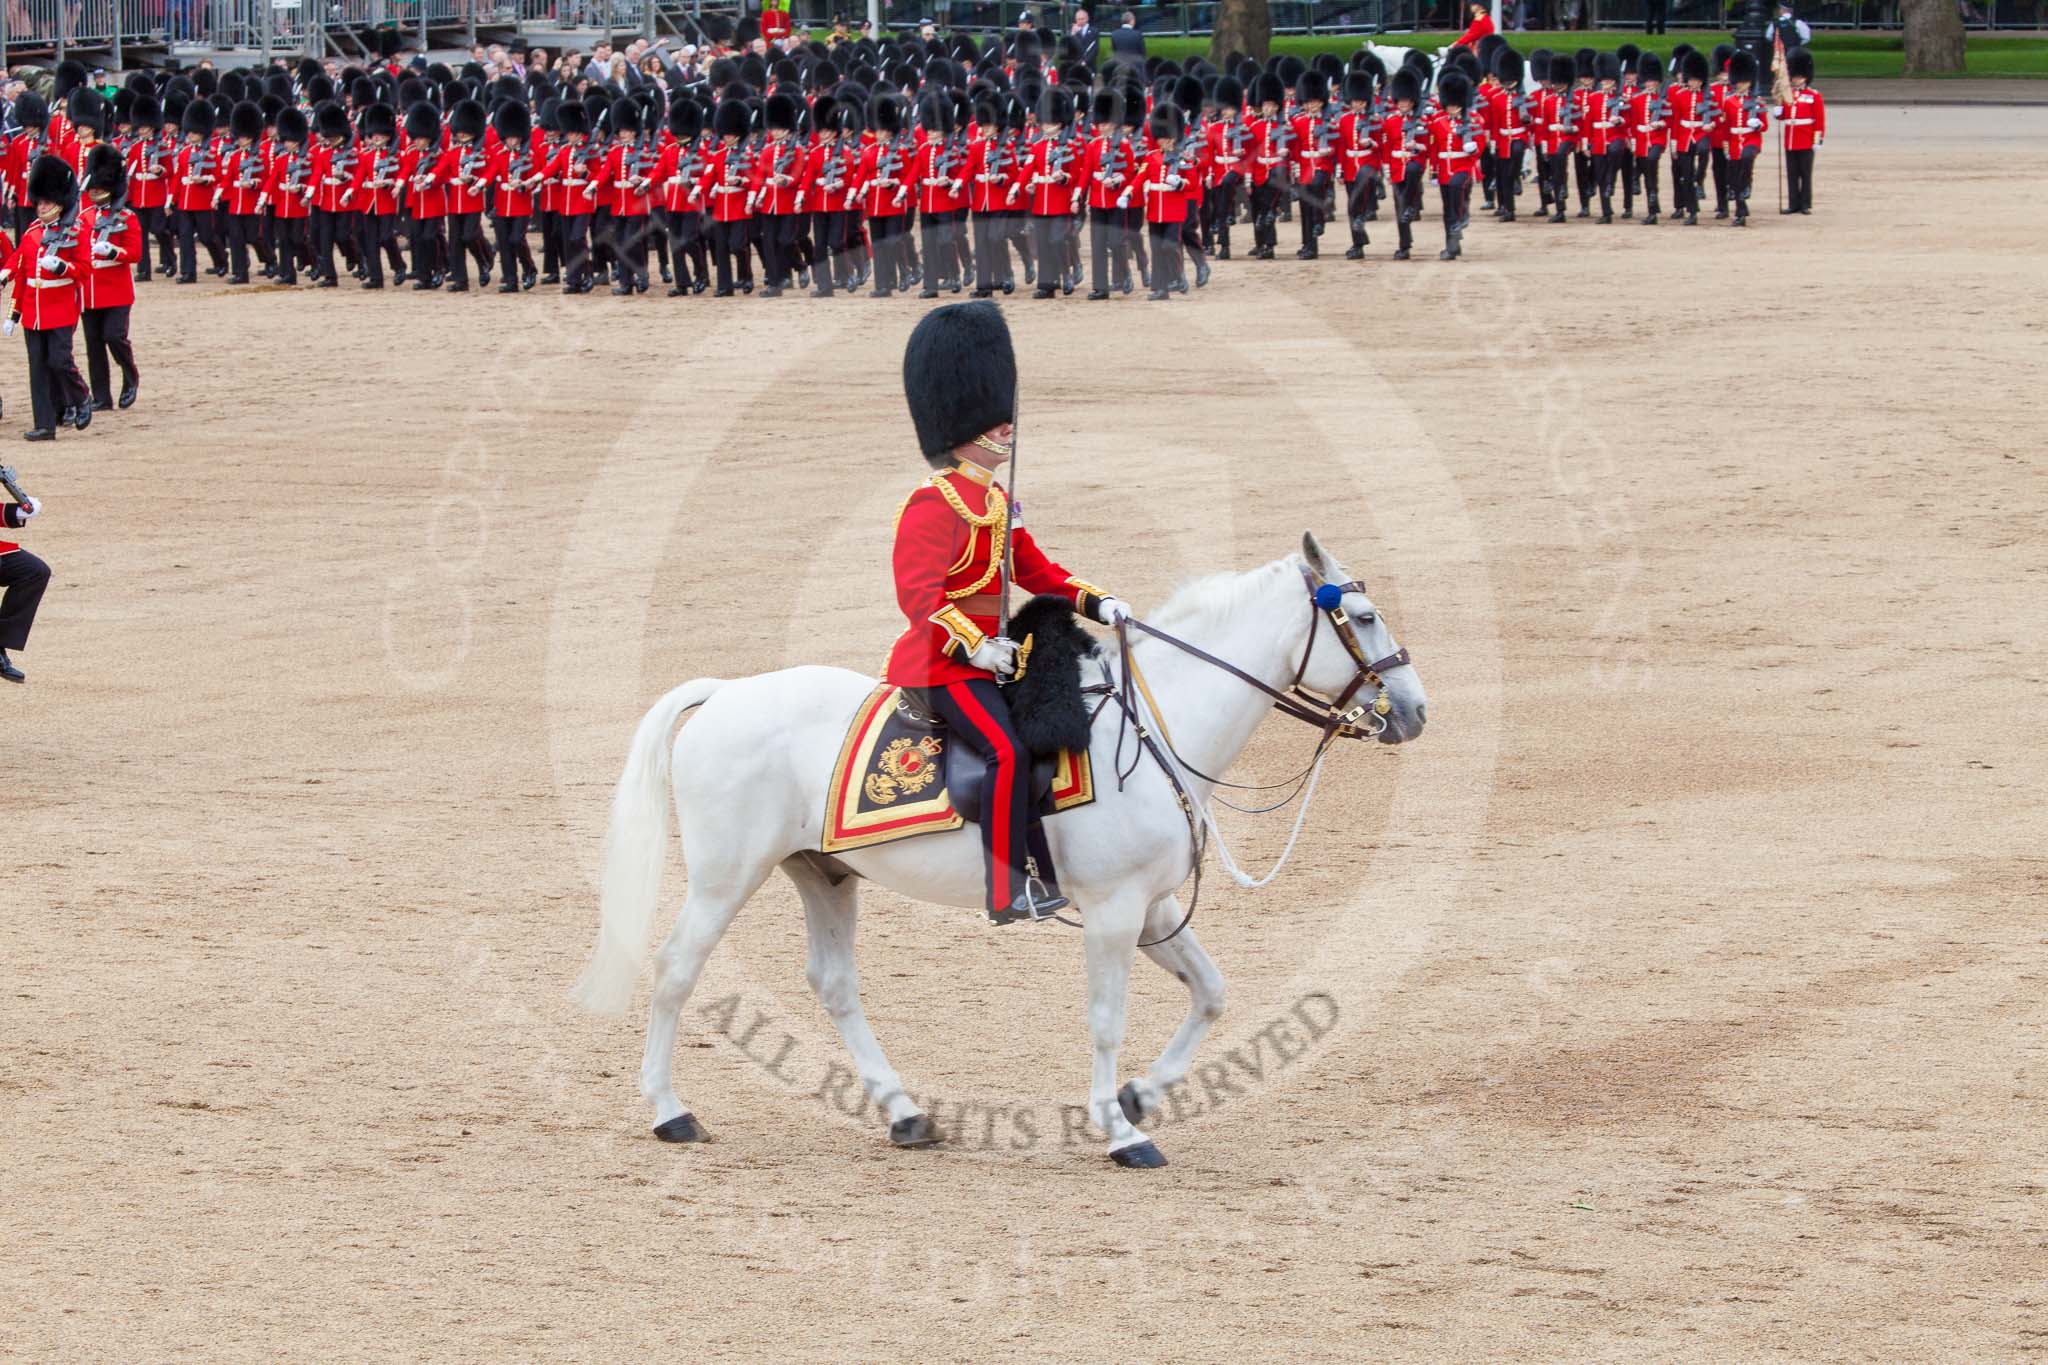 Trooping the Colour 2013: The March Past in Quick Time - the Major of the Parade, Major H G C Bettinson, Welsh Guards, and the Field Officer in Brigade Waiting, Lieutenant Colonel Dino Bossi, Welsh Guards. Image #596, 15 June 2013 11:44 Horse Guards Parade, London, UK